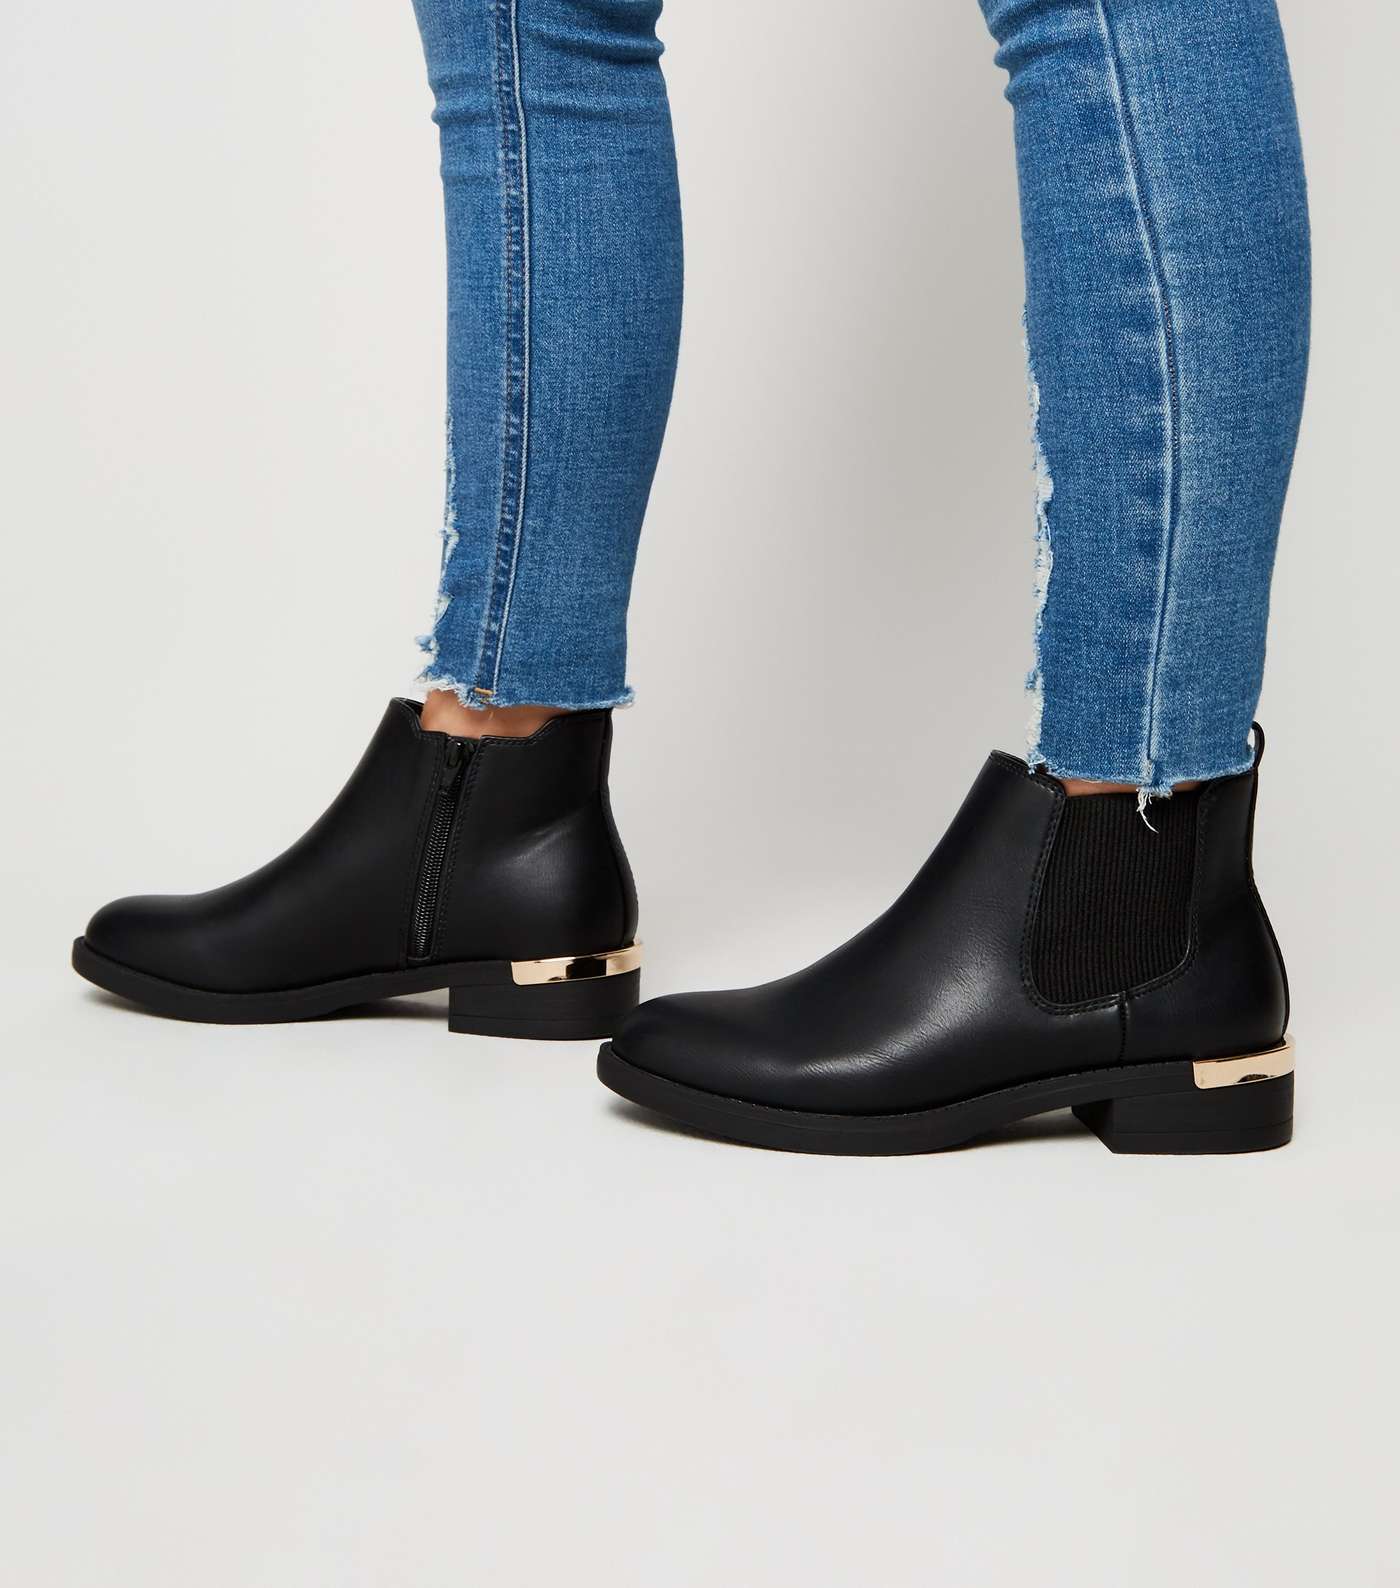 Girls Black Leather-Look Chelsea Boots Image 2